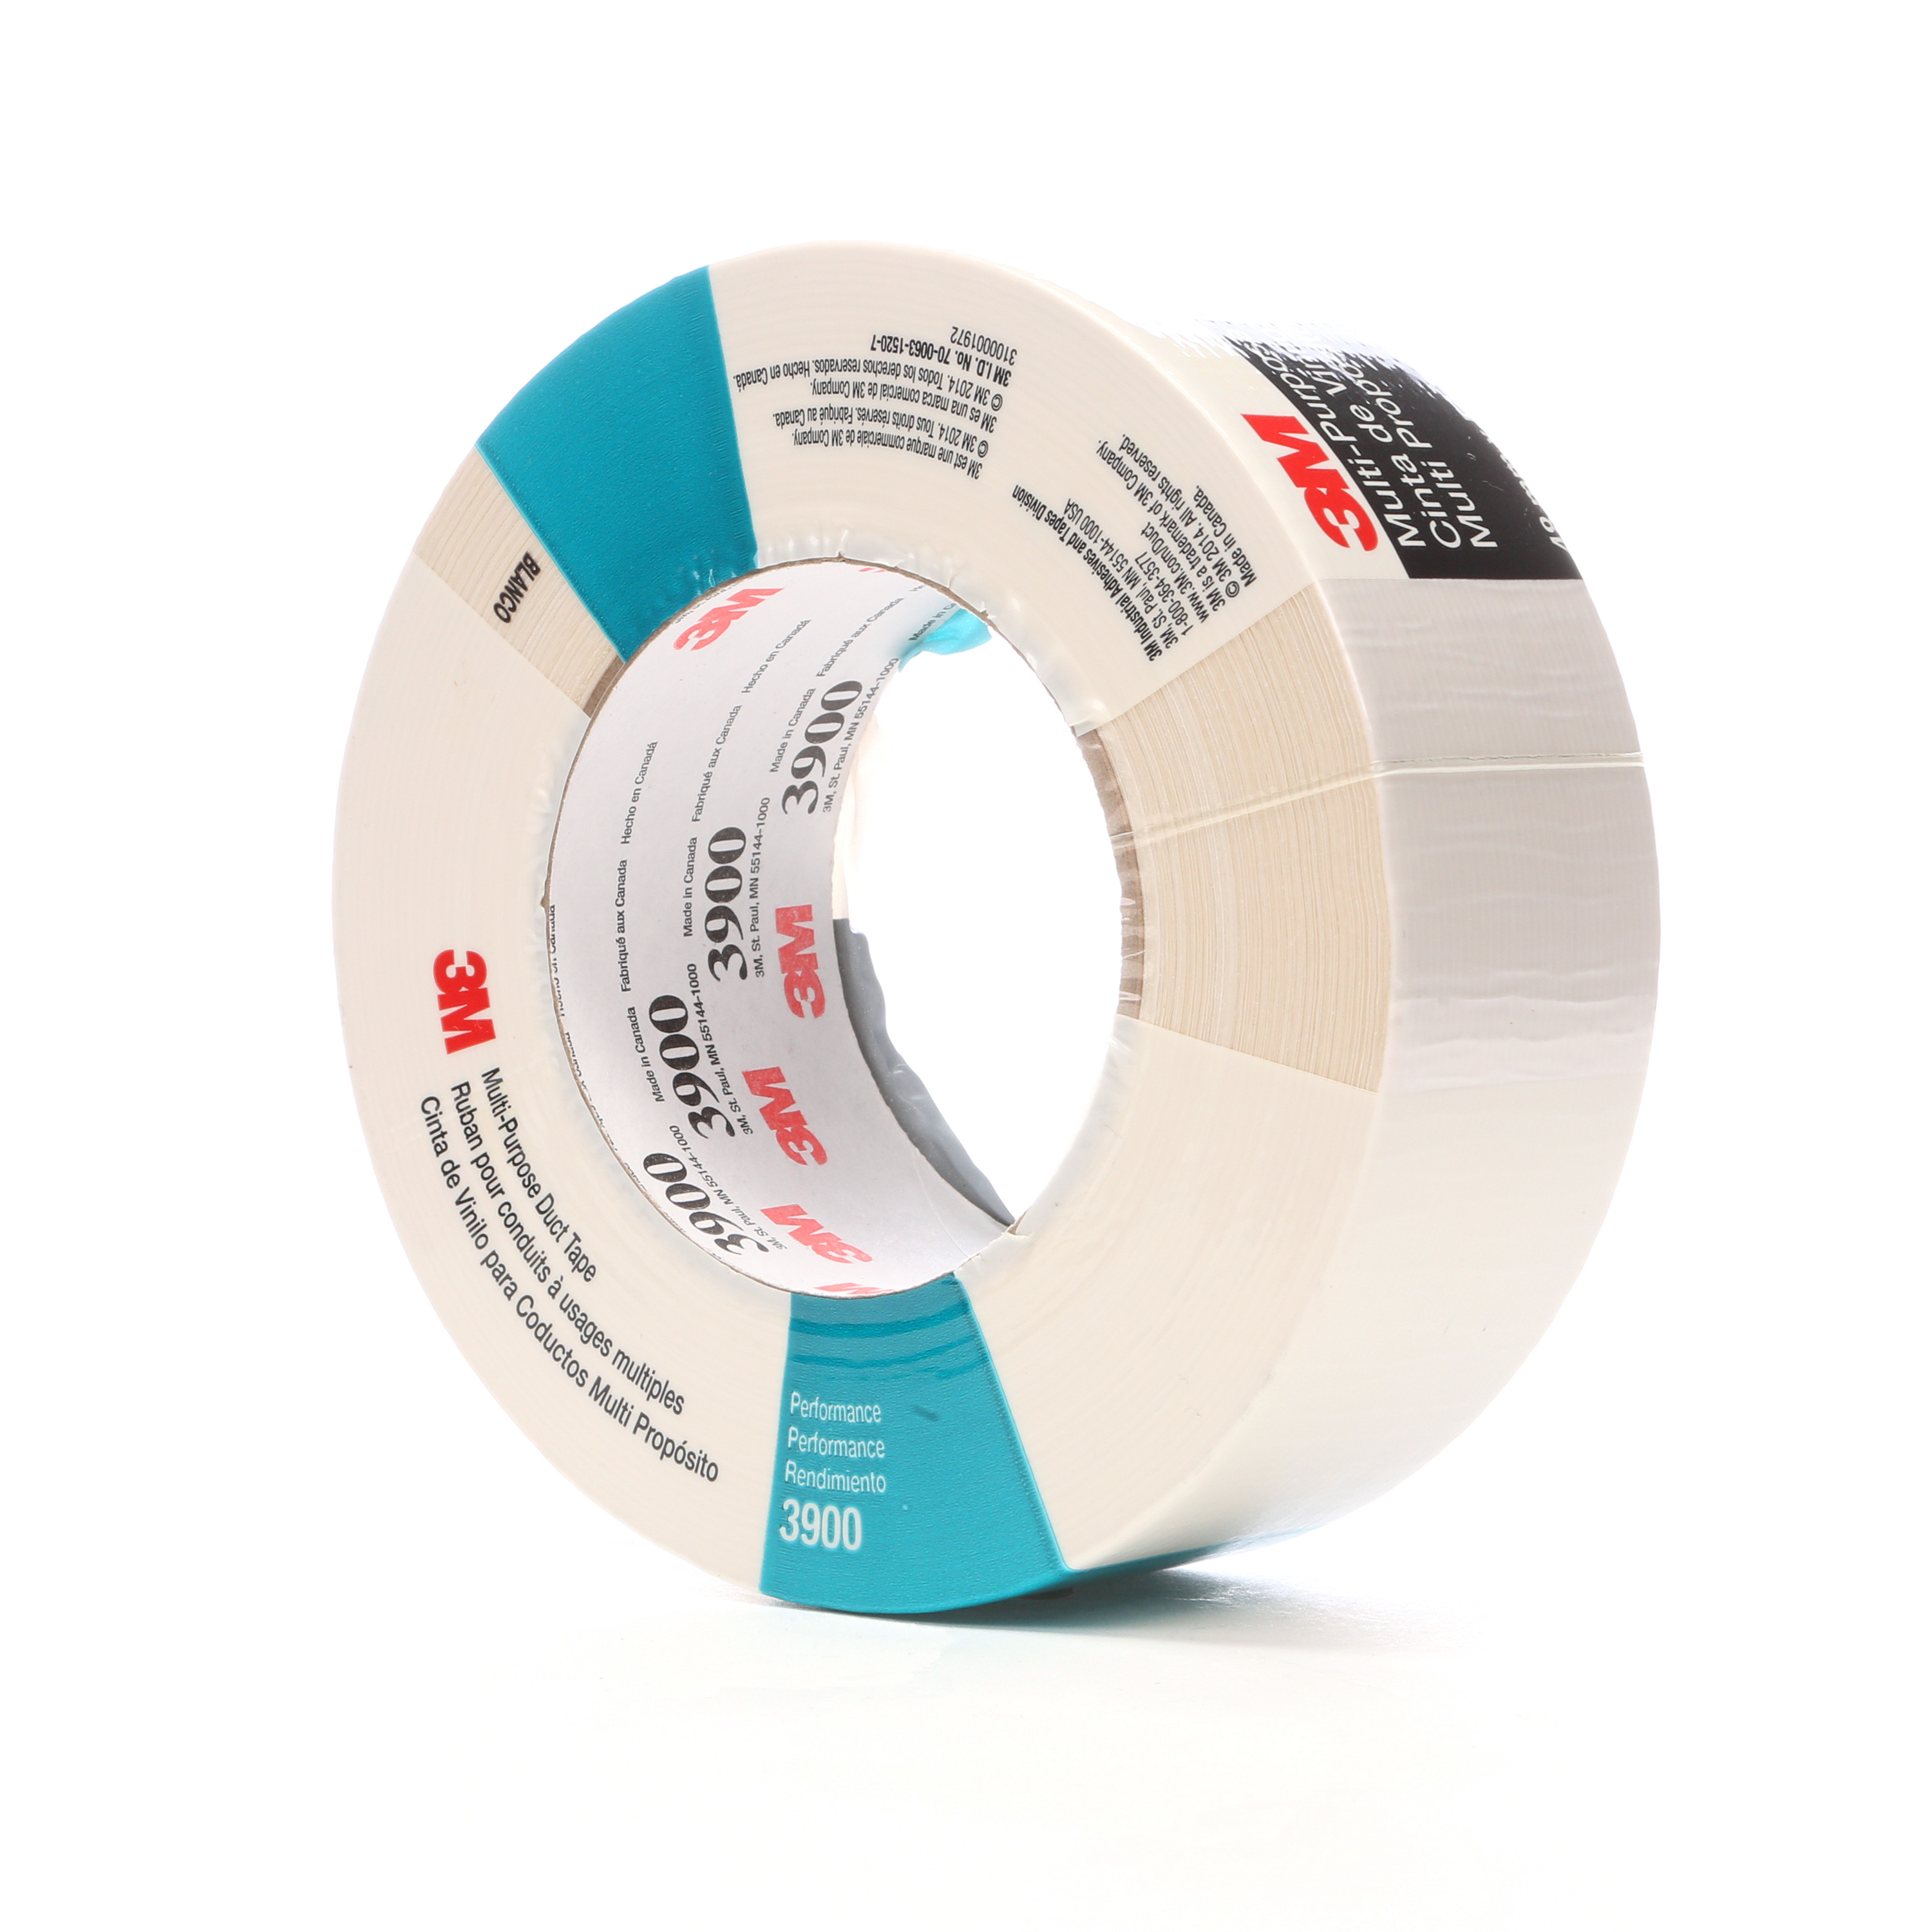 3M™ Multi-Purpose Duct Tape 3900, White, 48 mm x 54.8 m, 7.7 mil, 24 per
case, Individually Wrapped Conveniently Packaged